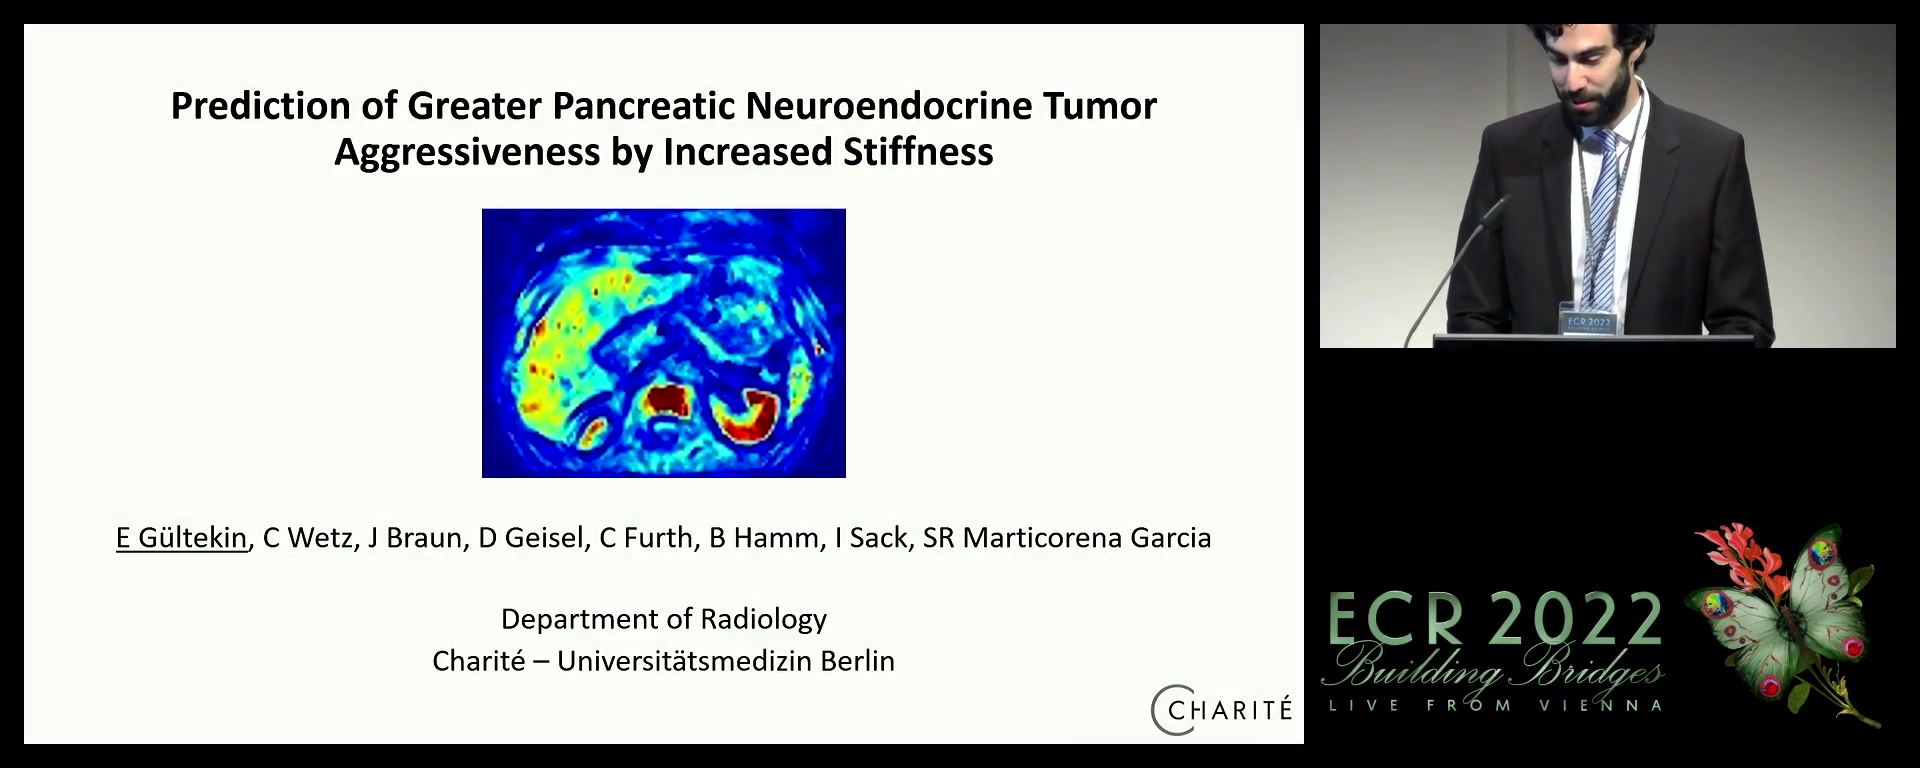 Prediction of greater pancreatic neuroendocrine tumour aggressiveness by increased stiffness